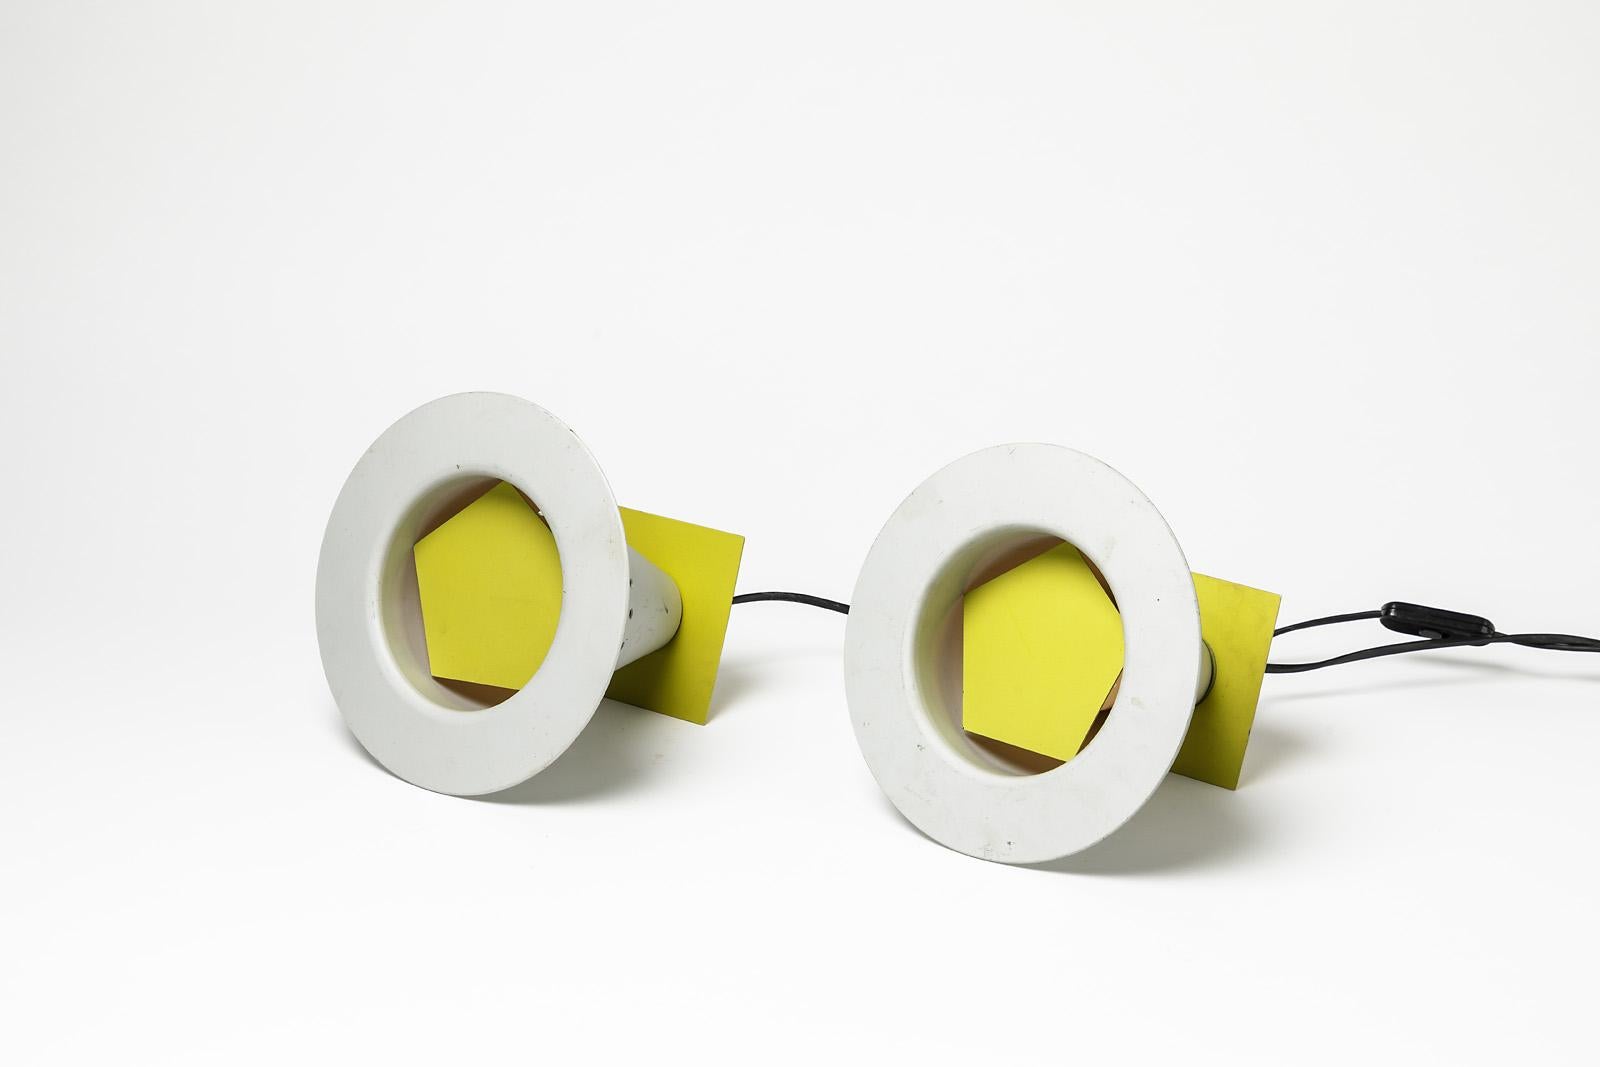 Minimalist Modern Design Pair of Table Lamp by Vincent Beaurin Artist 1993 Grey and Yellow